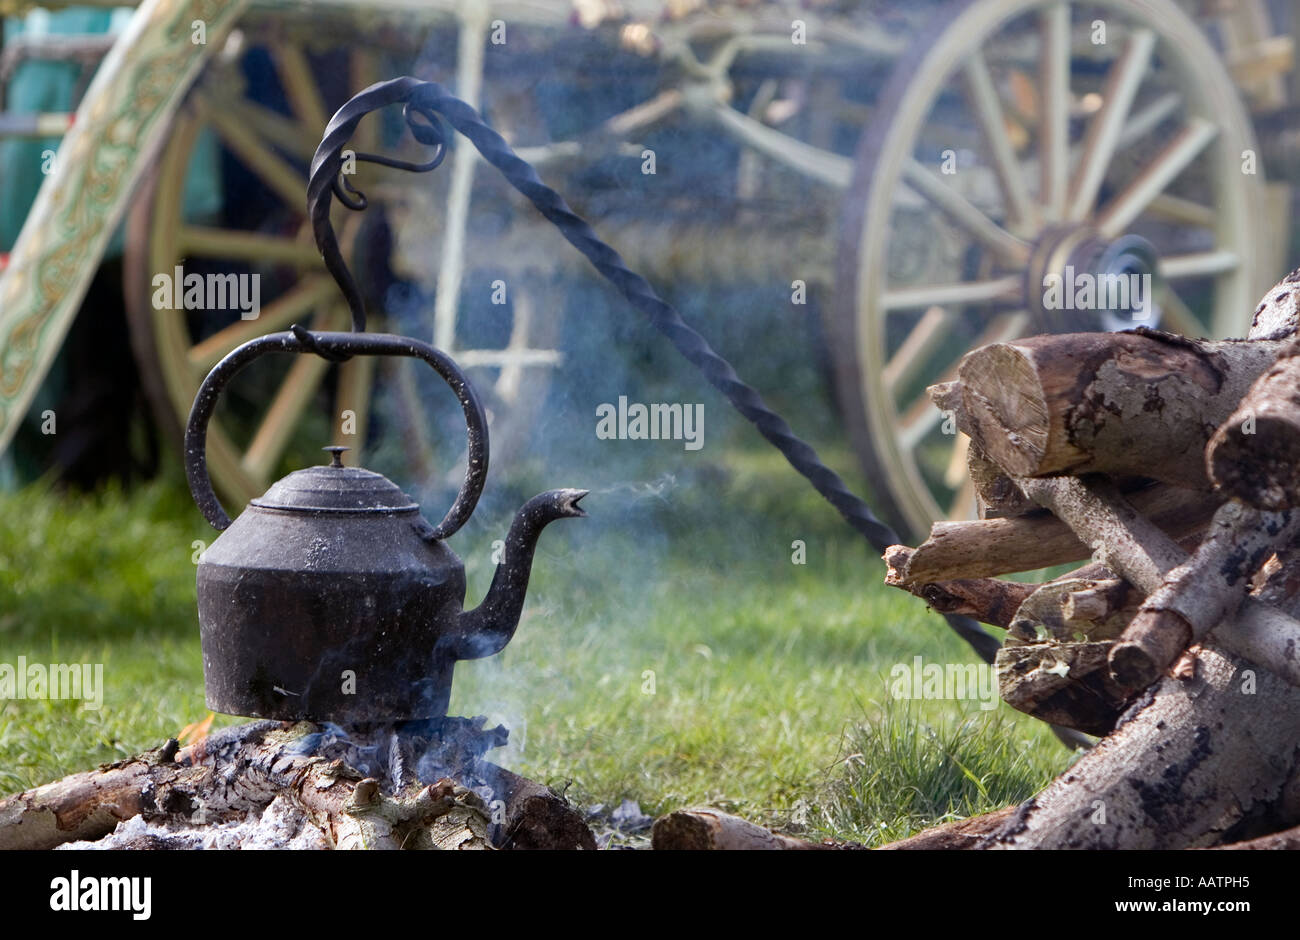 Gypsy caravan camp fire with water kettle. Stow-on-the-Wold, Cotswolds, Gloucestershire, England Stock Photo